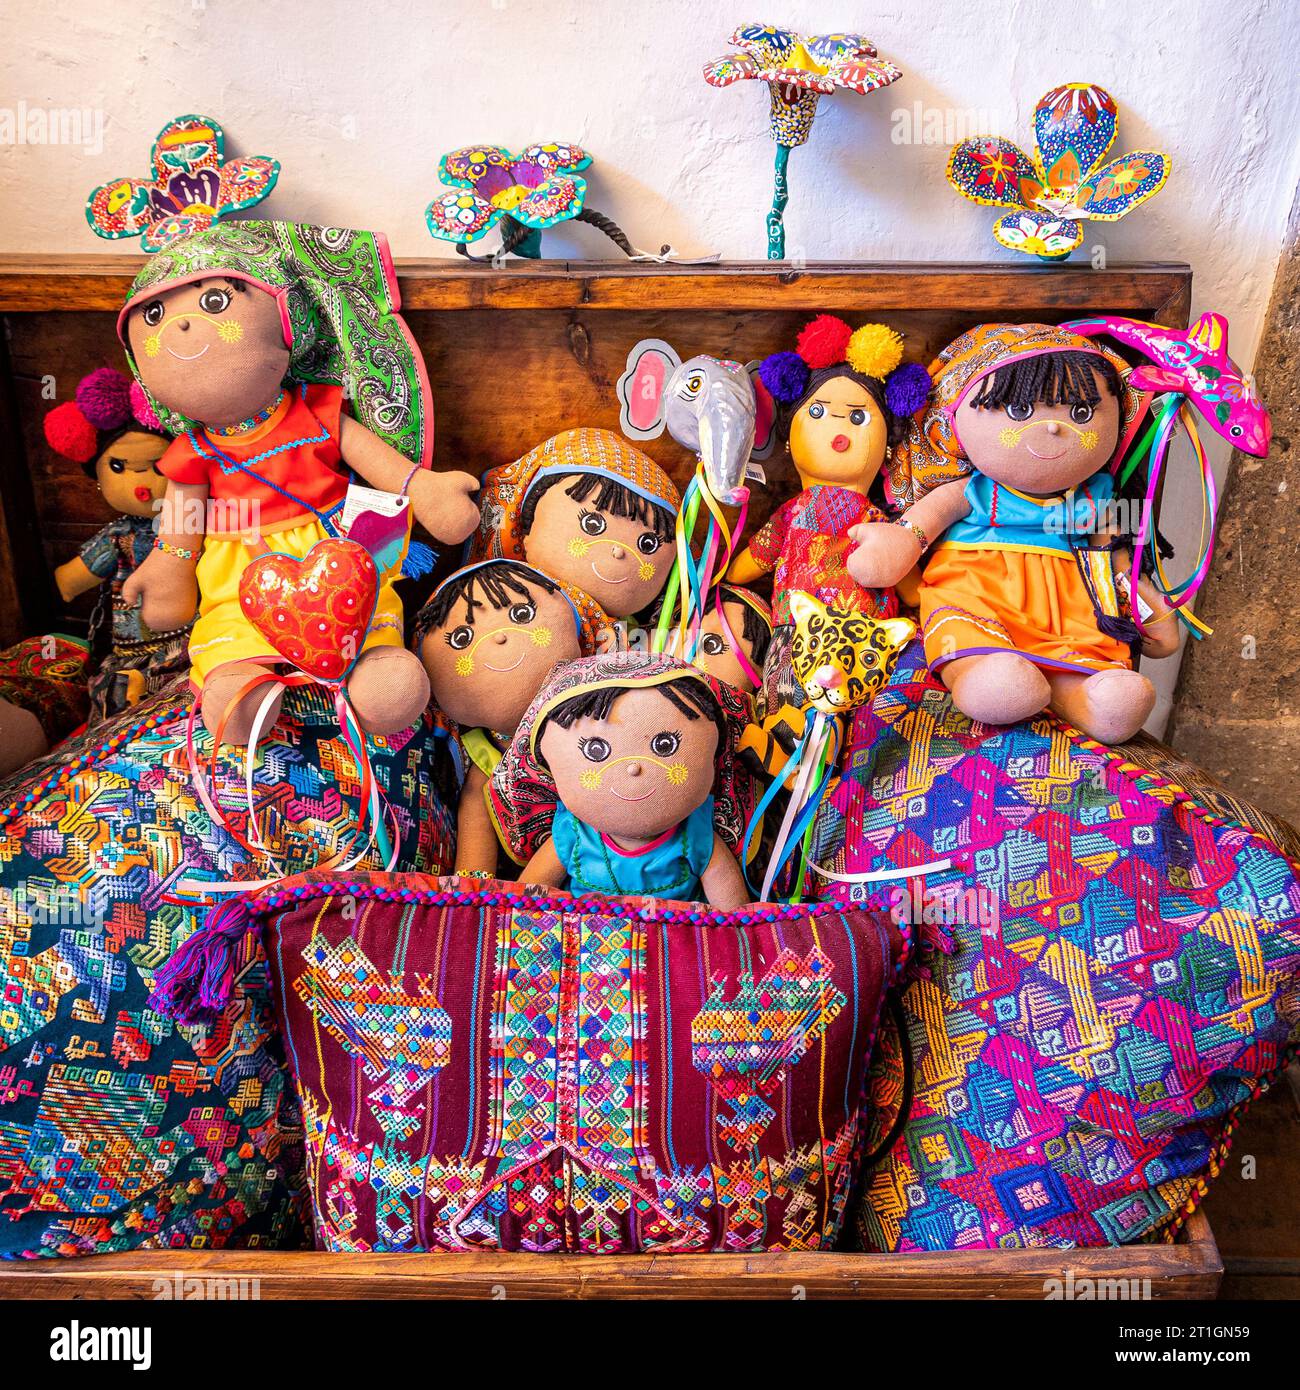 Hand stitched dolls in the Tlaquepaque, Mexico market. Stock Photo